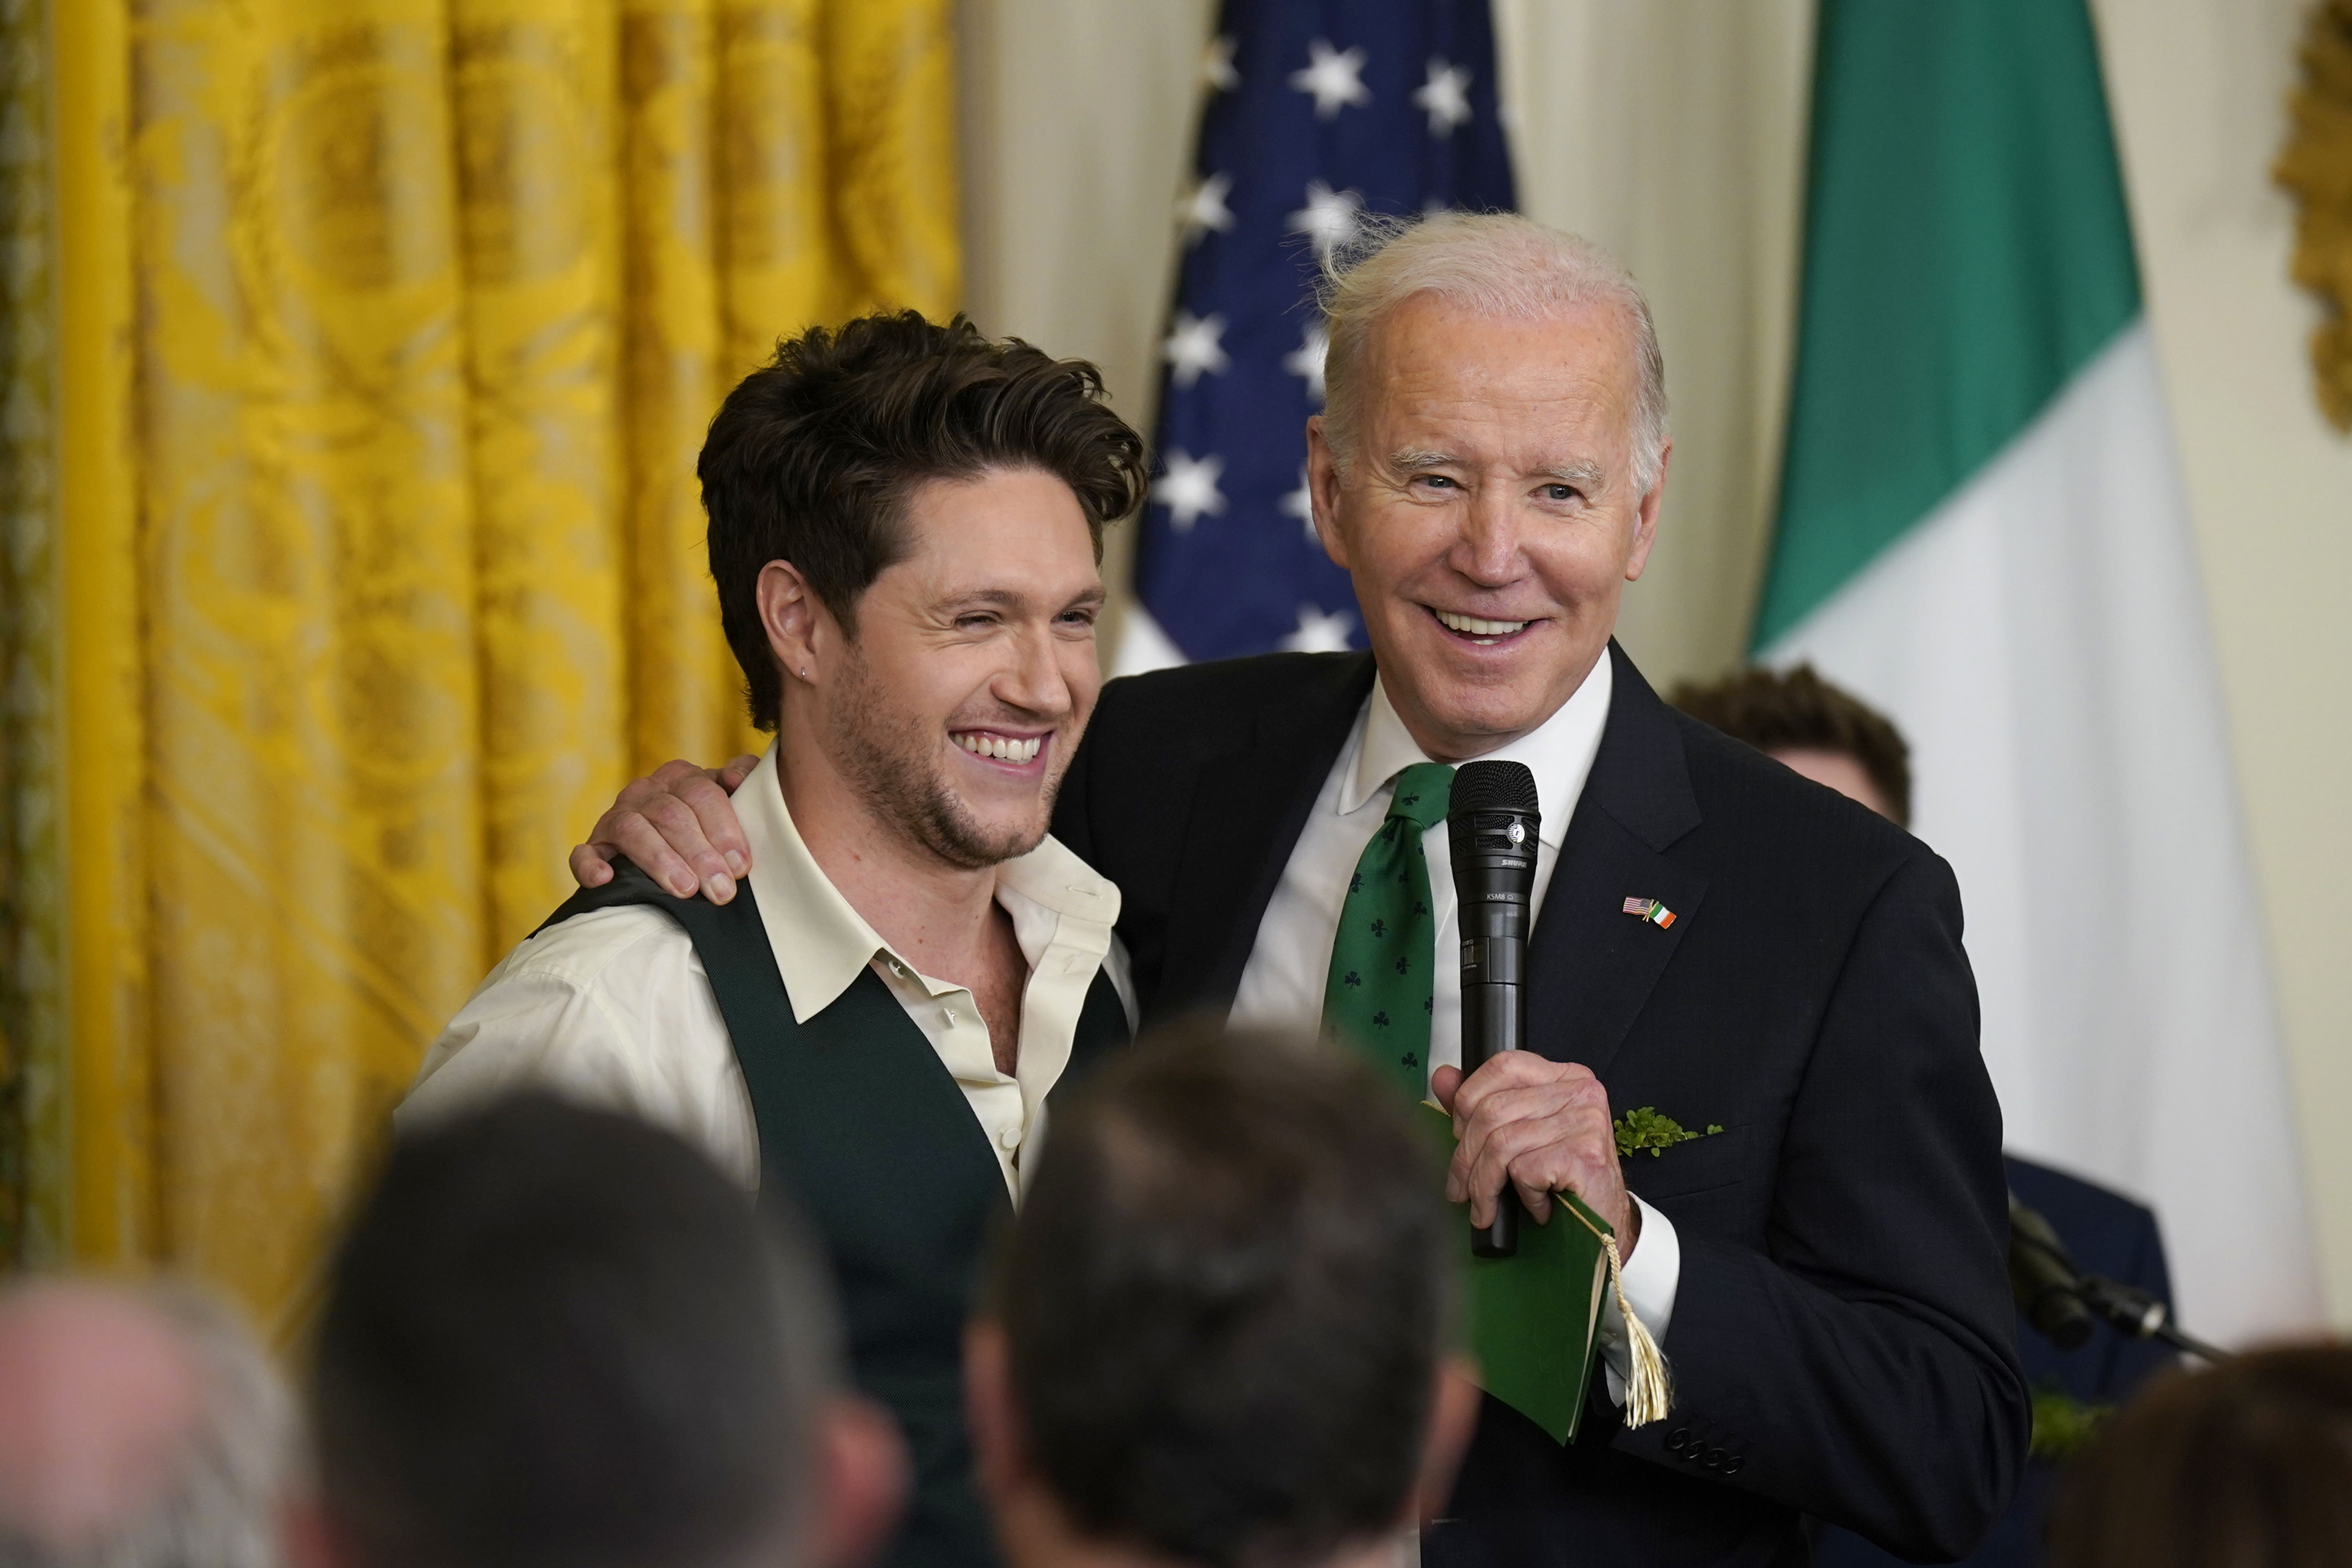 star Niall Horan 'welcome back anytime' after White House performance | The Independent